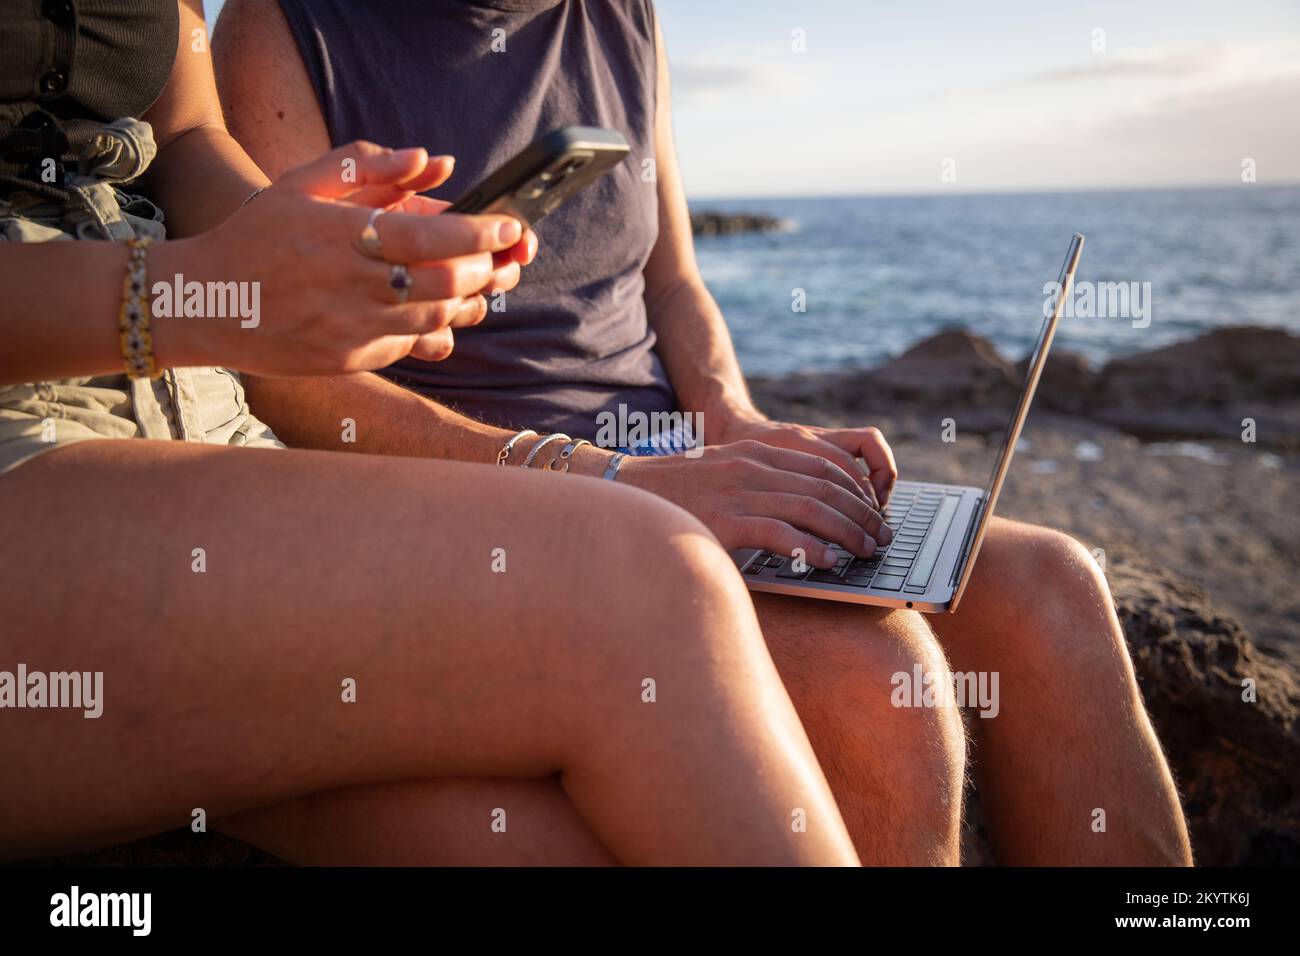 Close-up of two people's hands at the beach using their smartphone and laptop Stock Photo